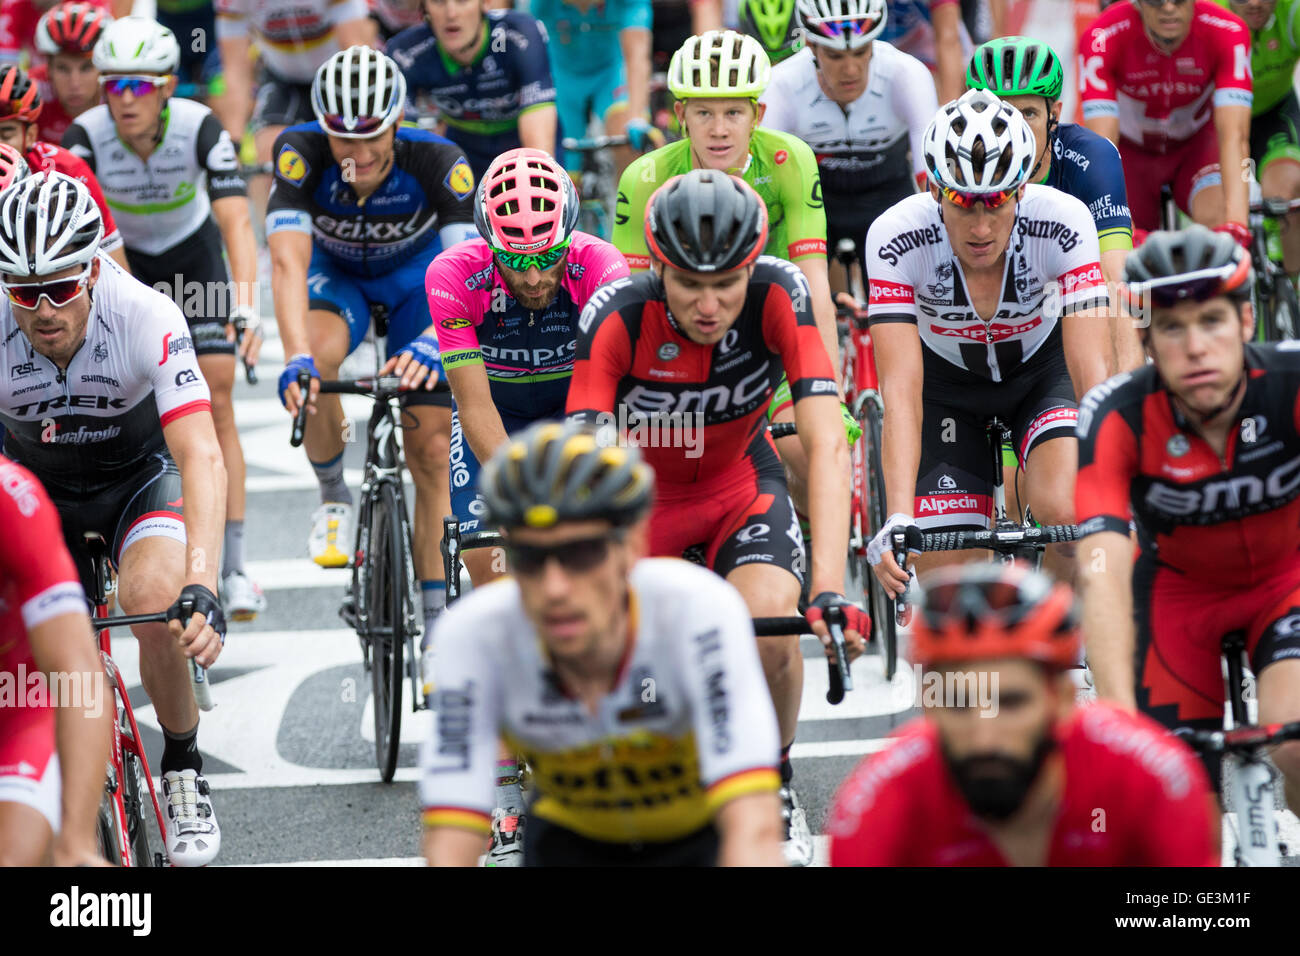 Tour de France. 22nd July, 2016. Saint-Gervais-les-Bains, FR. Riders in the grupetto cross the line, relieved for the stage to be over. Grupetto riders are no longer racing for time or placings on a stage, simply to finish within the time cut. John Kavouris/Alamy Live News Stock Photo